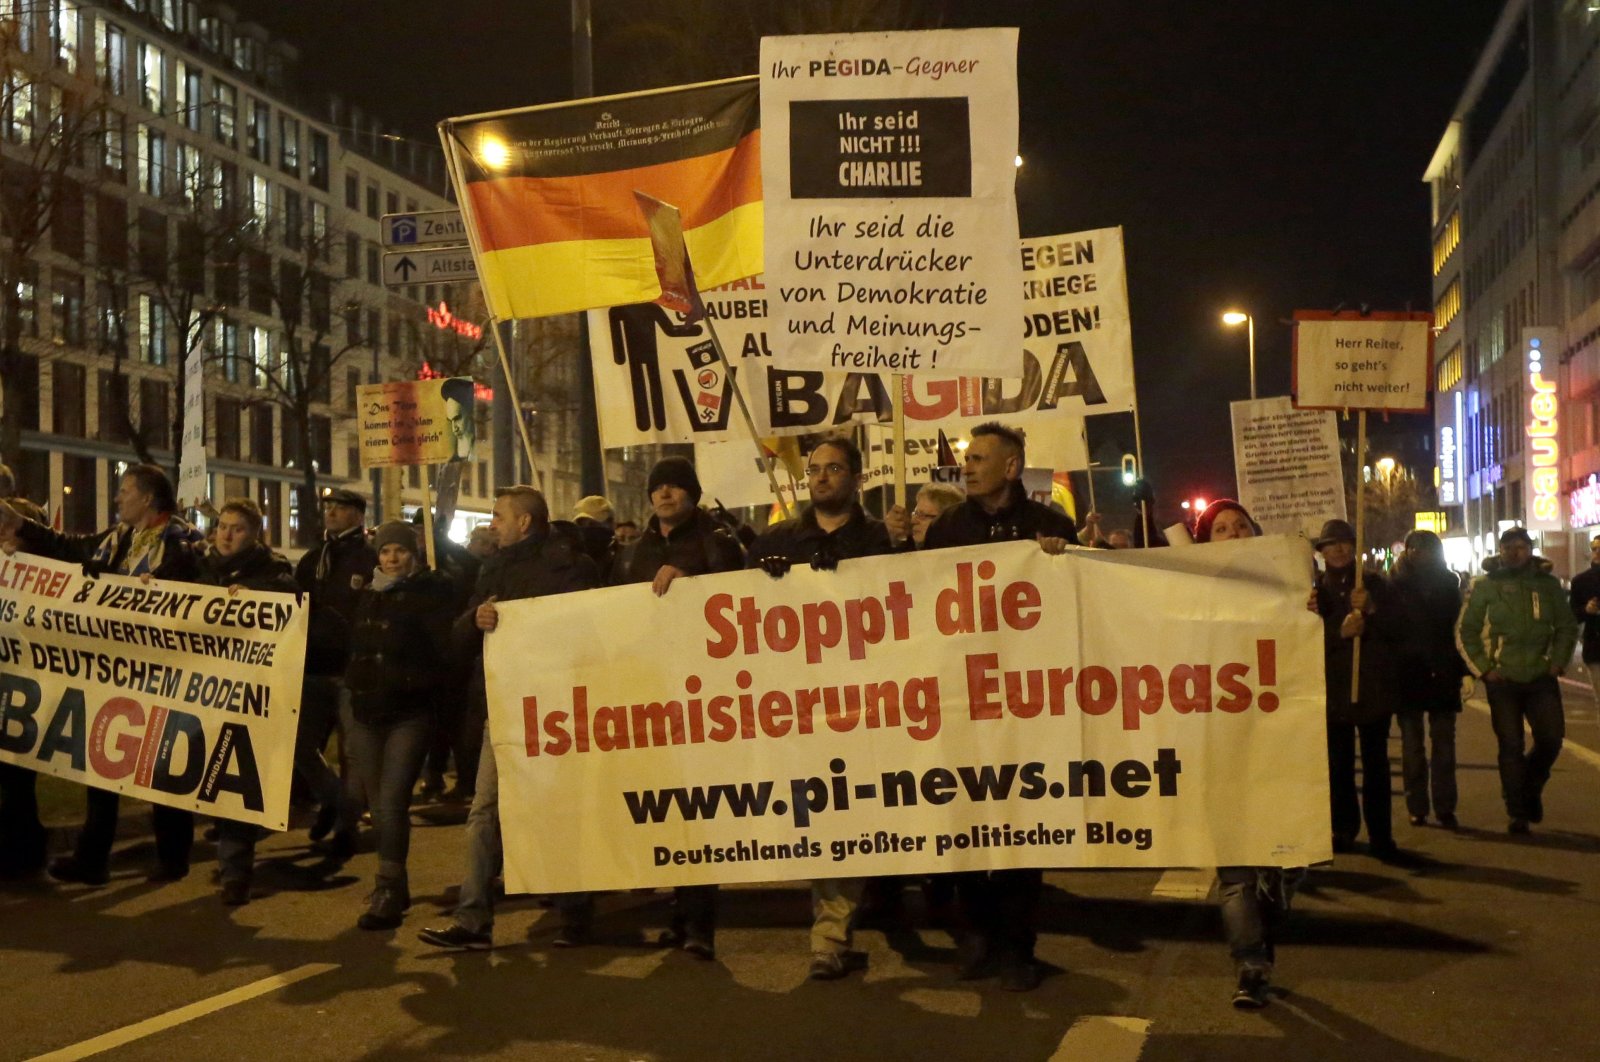 Participants of BAGIDA, the Bavarian section of the anti-immigration movement 'Patriotic Europeans against the Islamization of the West' (PEGIDA), gather in Munich, Germany, Monday, Jan. 19, 2015. (AP File Photo)